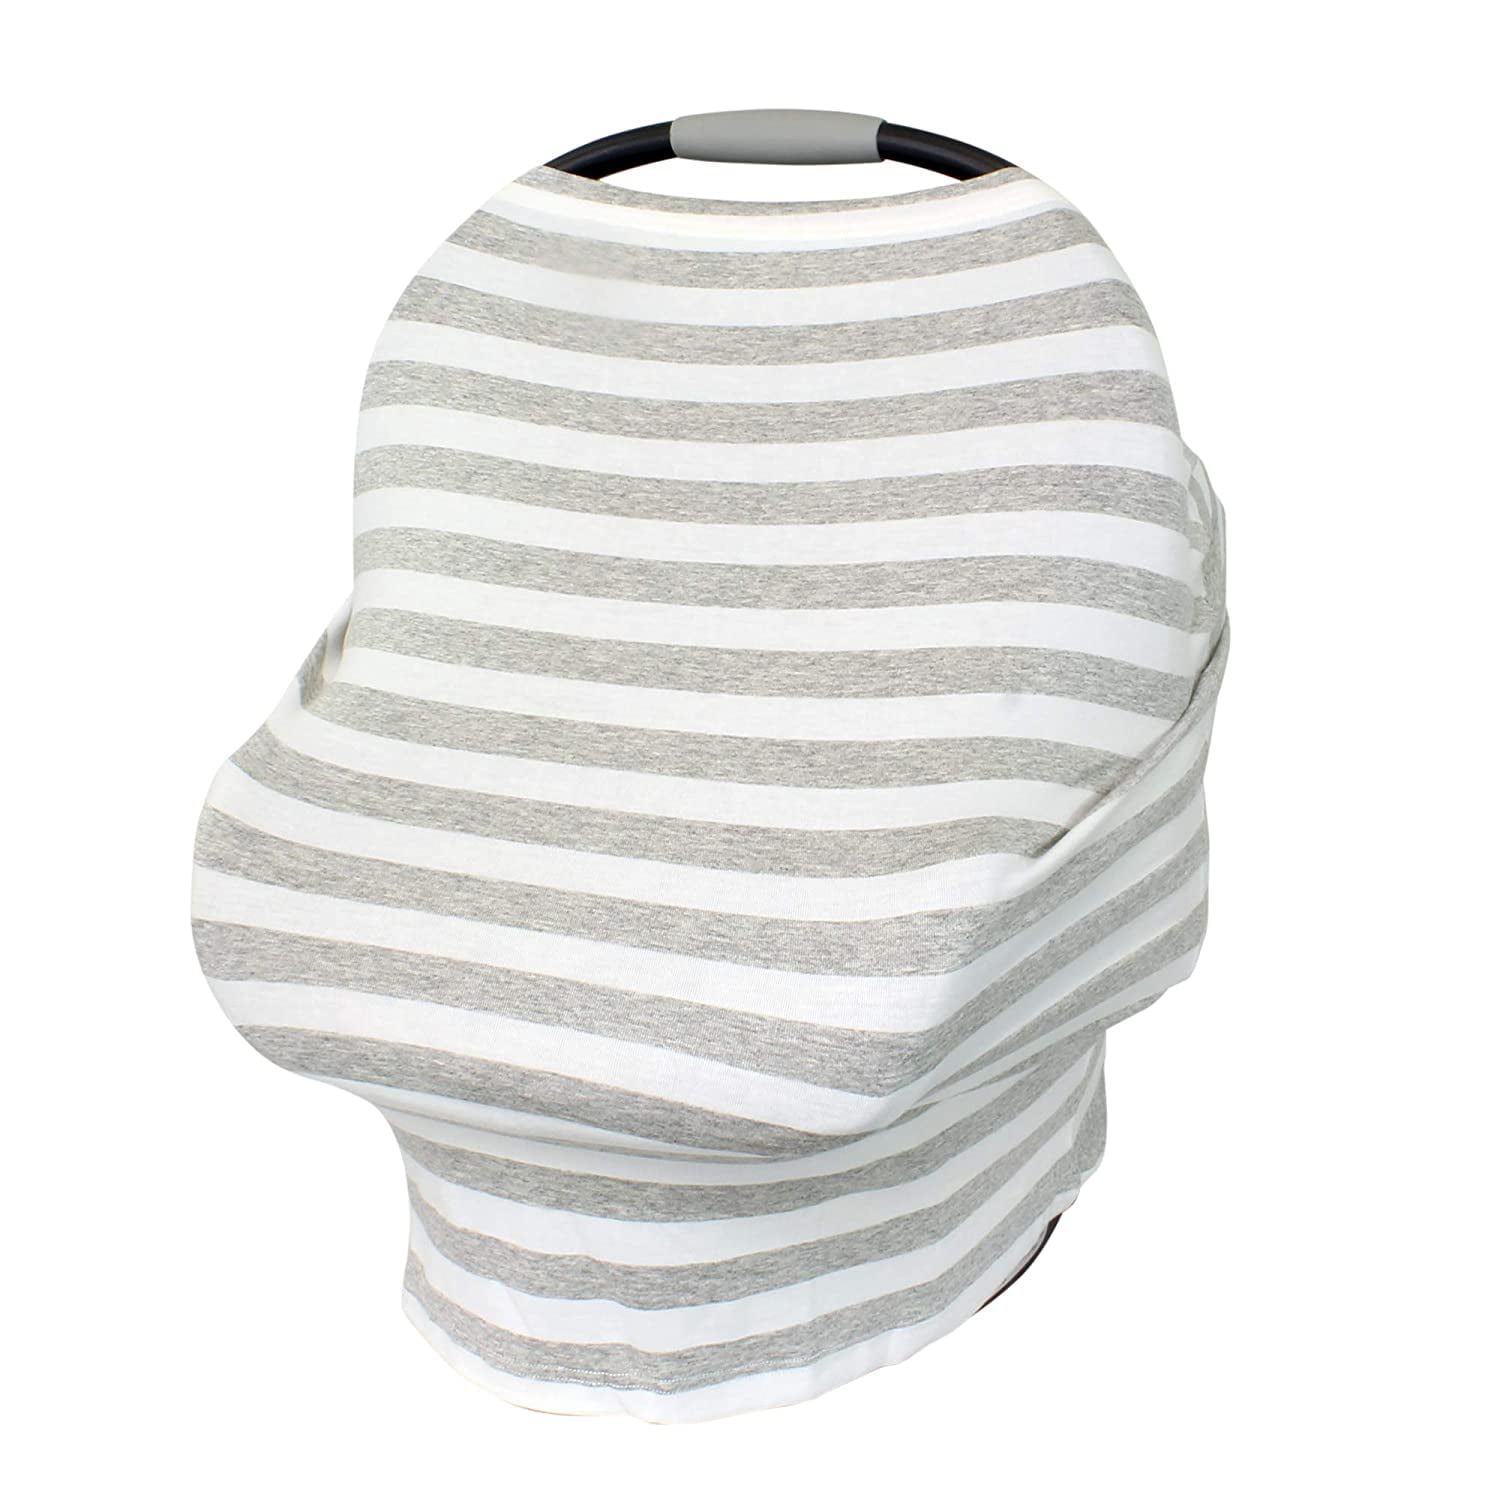 Car Seat Canopy Multi Use Cover Baby hat Carrying nursing Stretchy Cover 11MAR06 